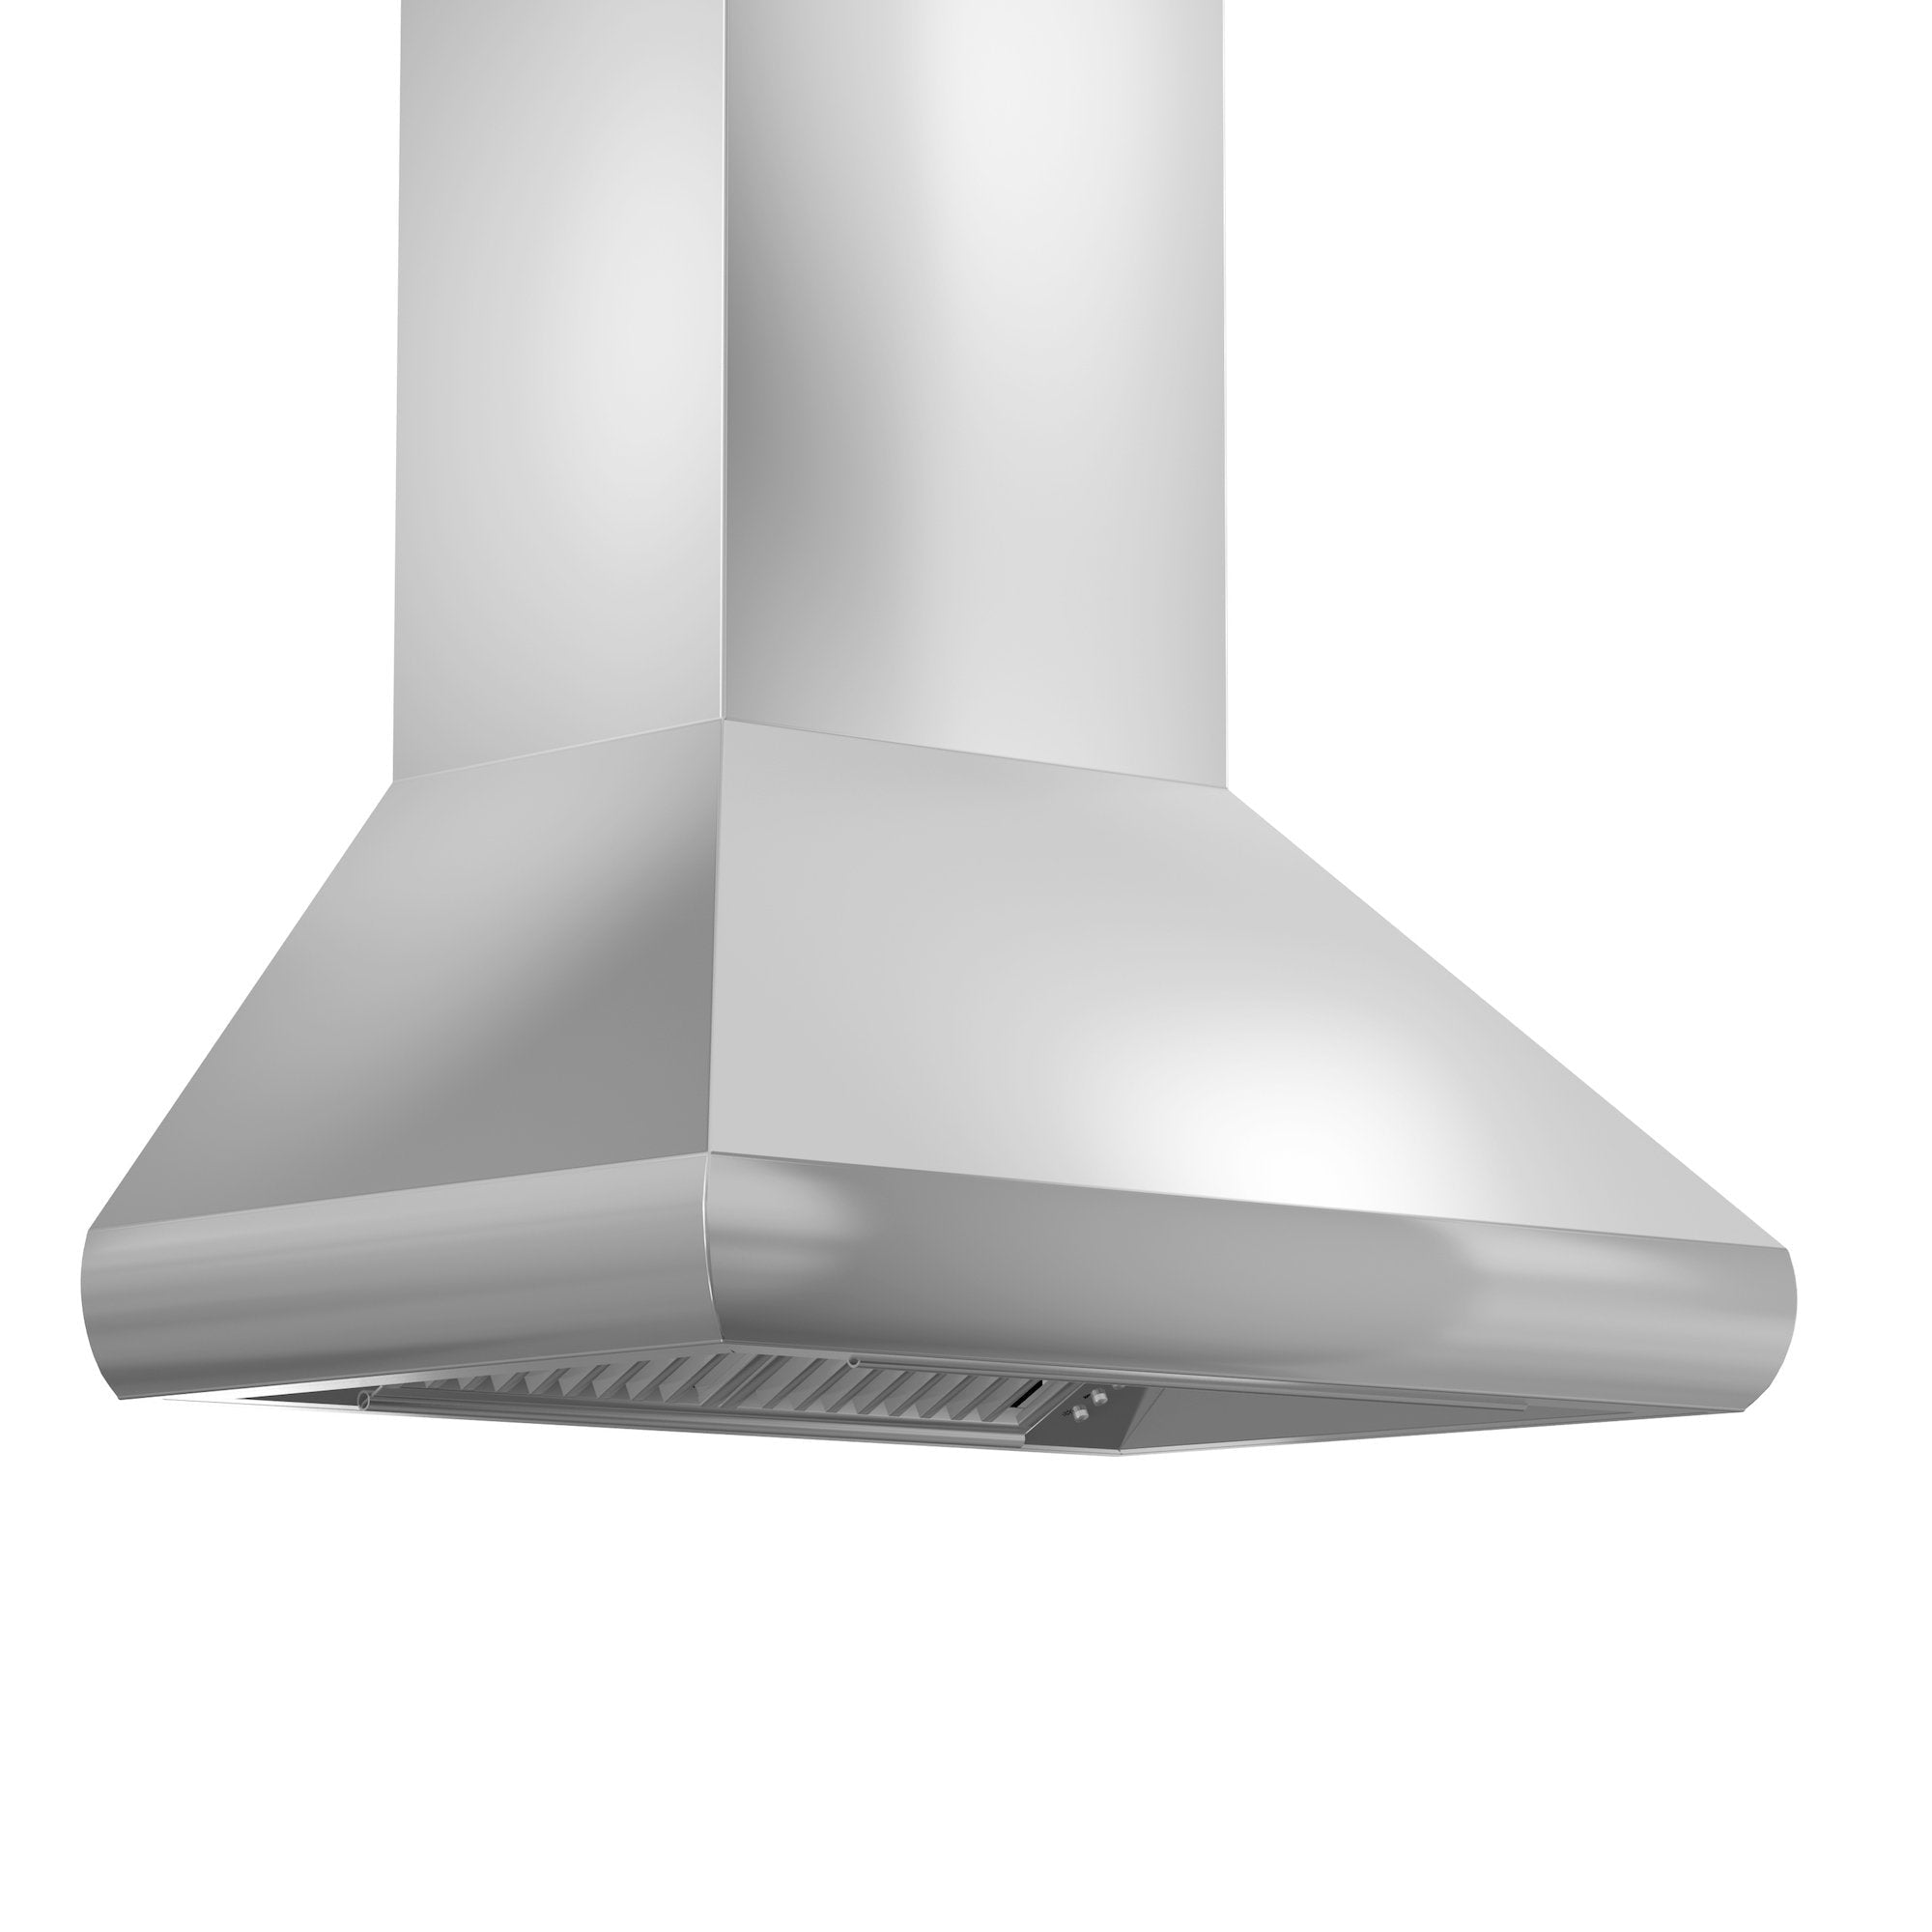 ZLINE Professional Convertible Vent Wall Mount Range Hood in Stainless Steel with Crown Molding (587CRN) side.